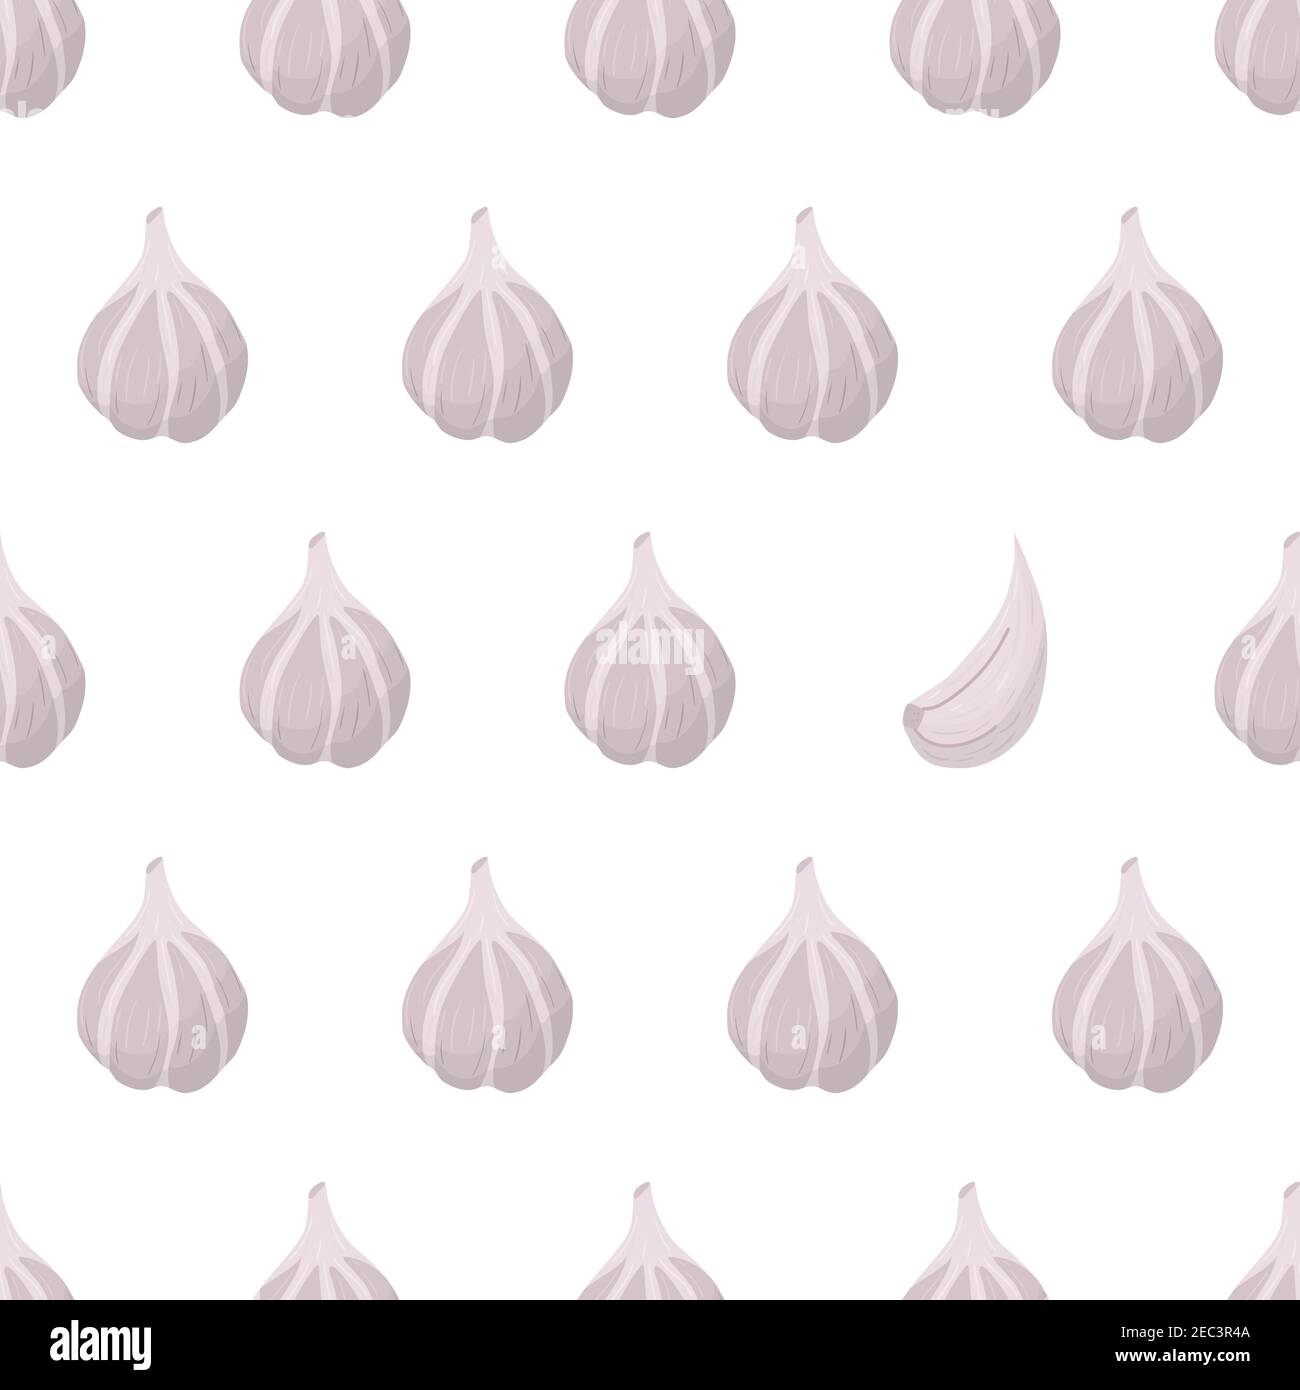 Garlic bulb seamless pattern in cartoon art style with eye catching element of garlic clove. Vector illustration graphic design. Healthy food background. Vegetable, spice for cooking. Stock Vector